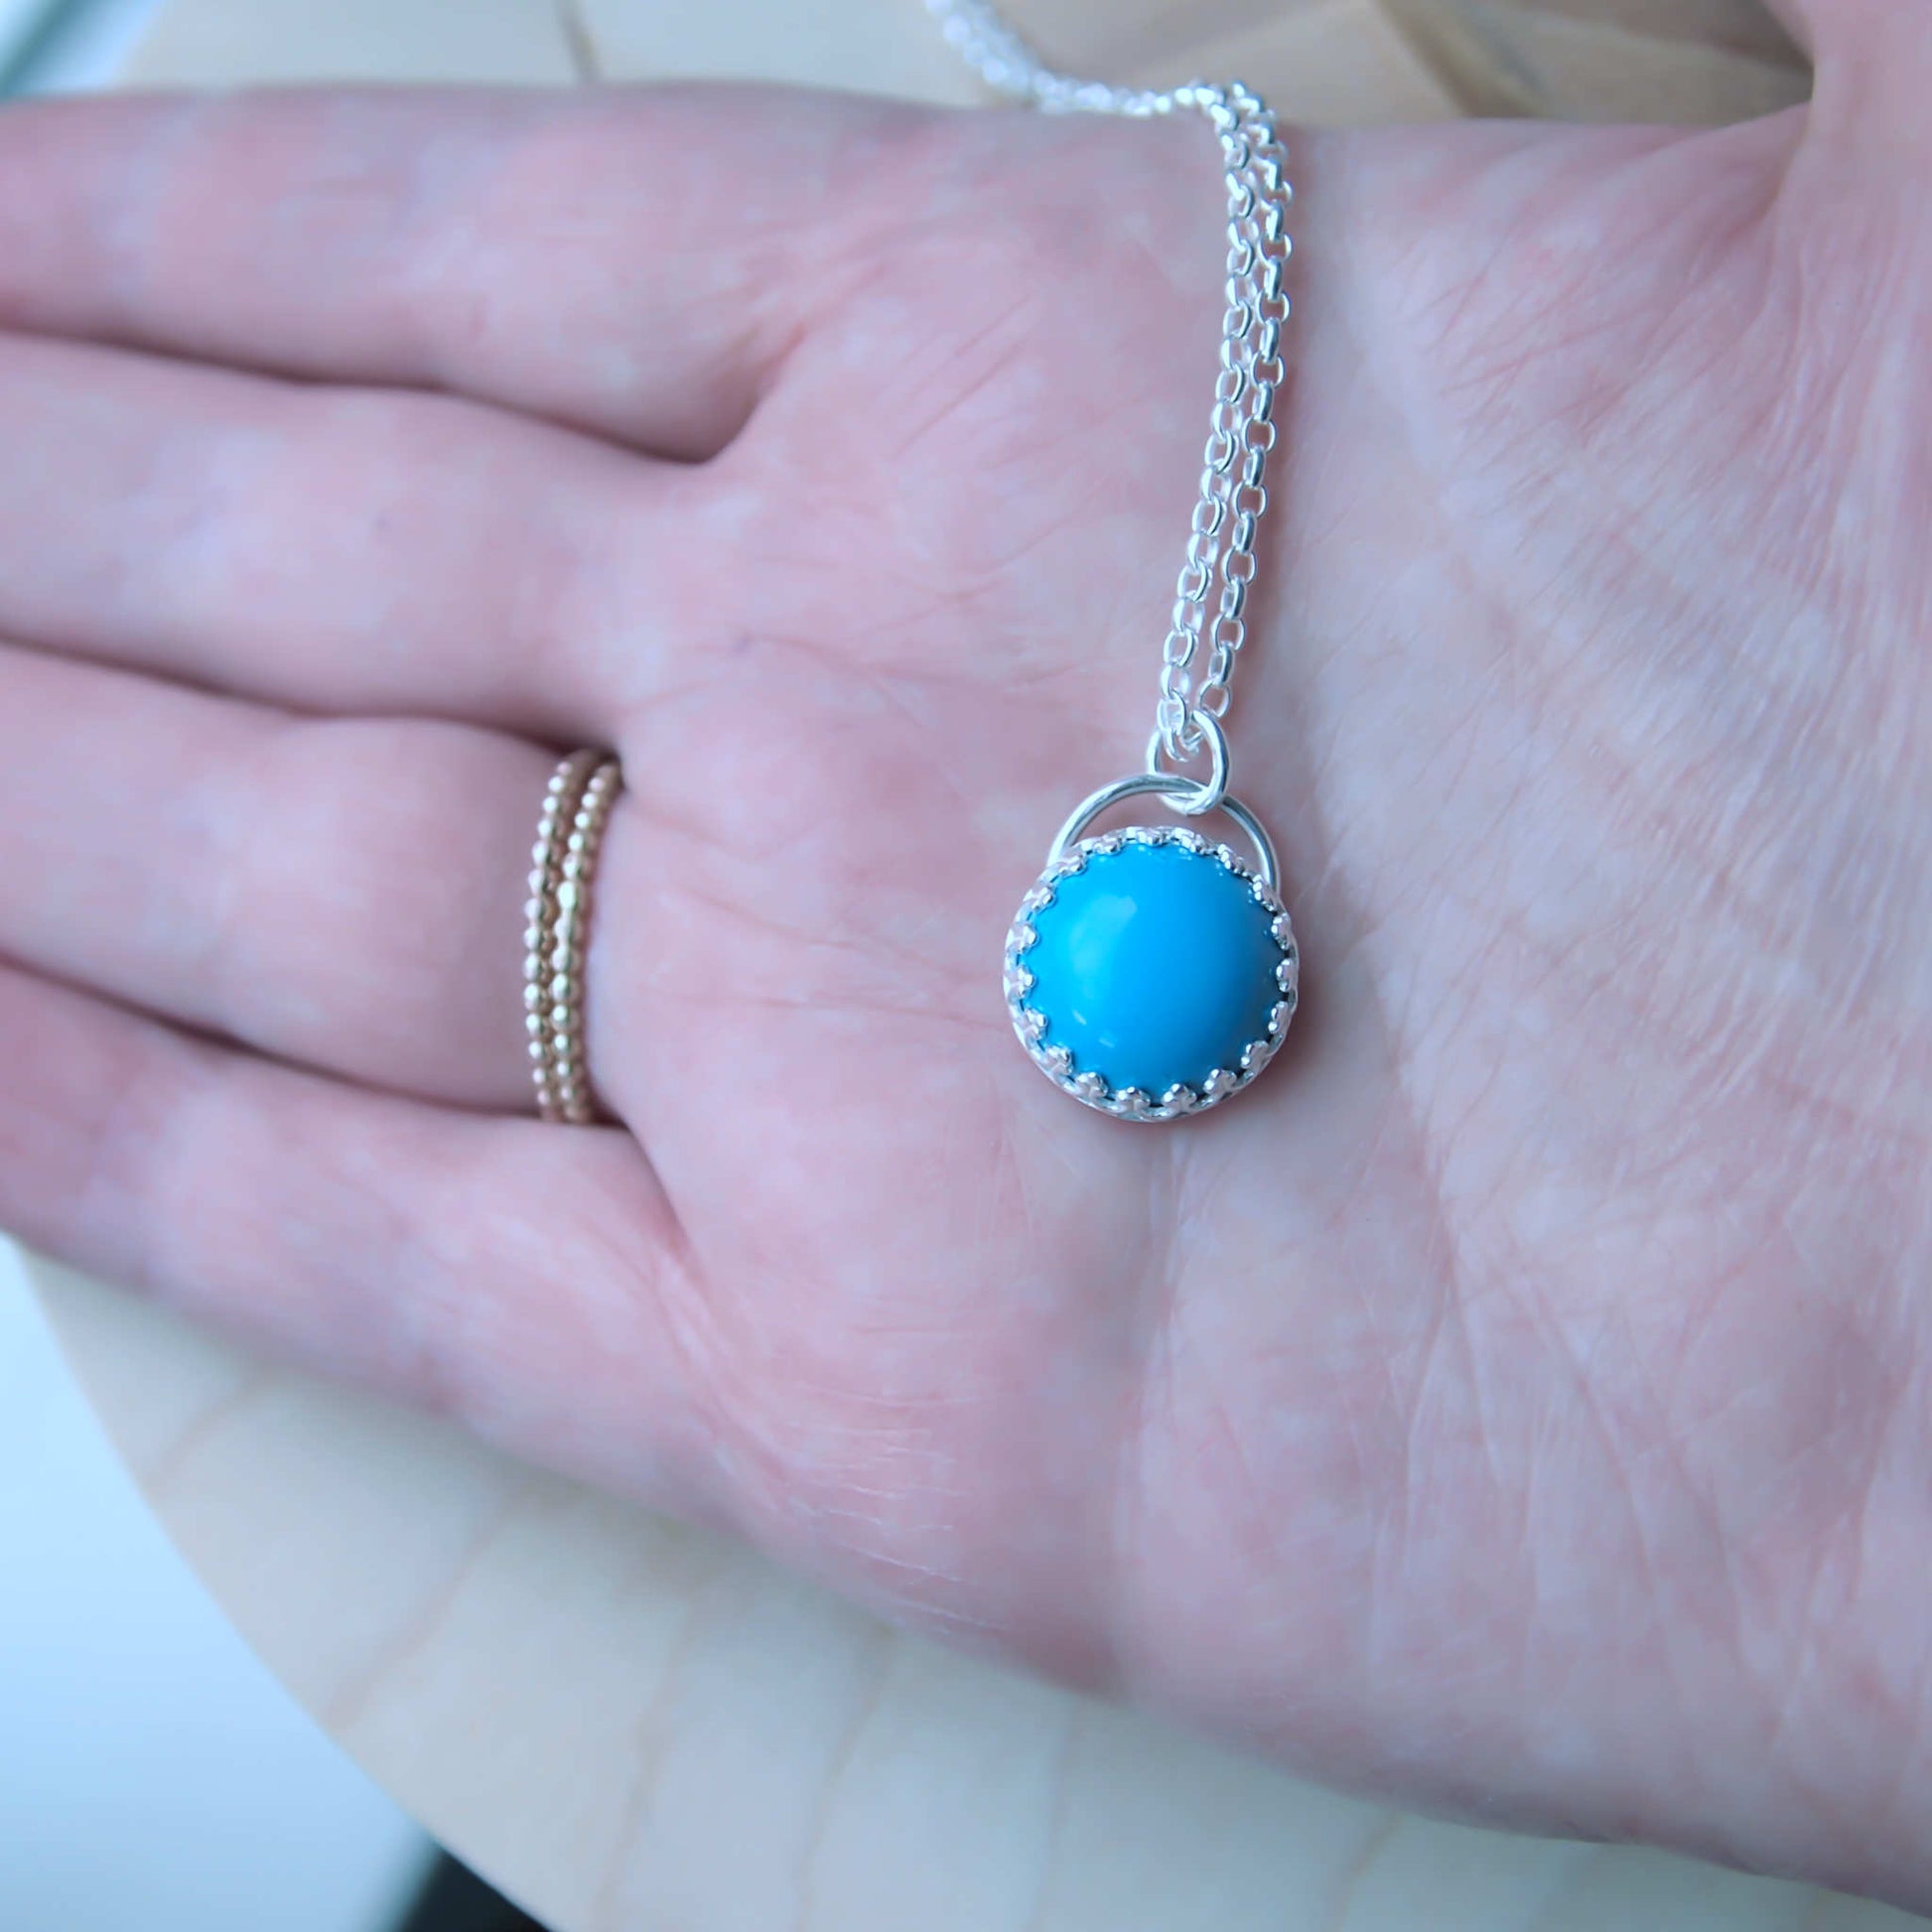 Handmade Turquoise Necklace with a round stone and a simple silver setting. December Birthstone is Turquoise, making this a perfect December Birthday Gift. Handmade by a small indie business  jeweller in Edinburgh UK